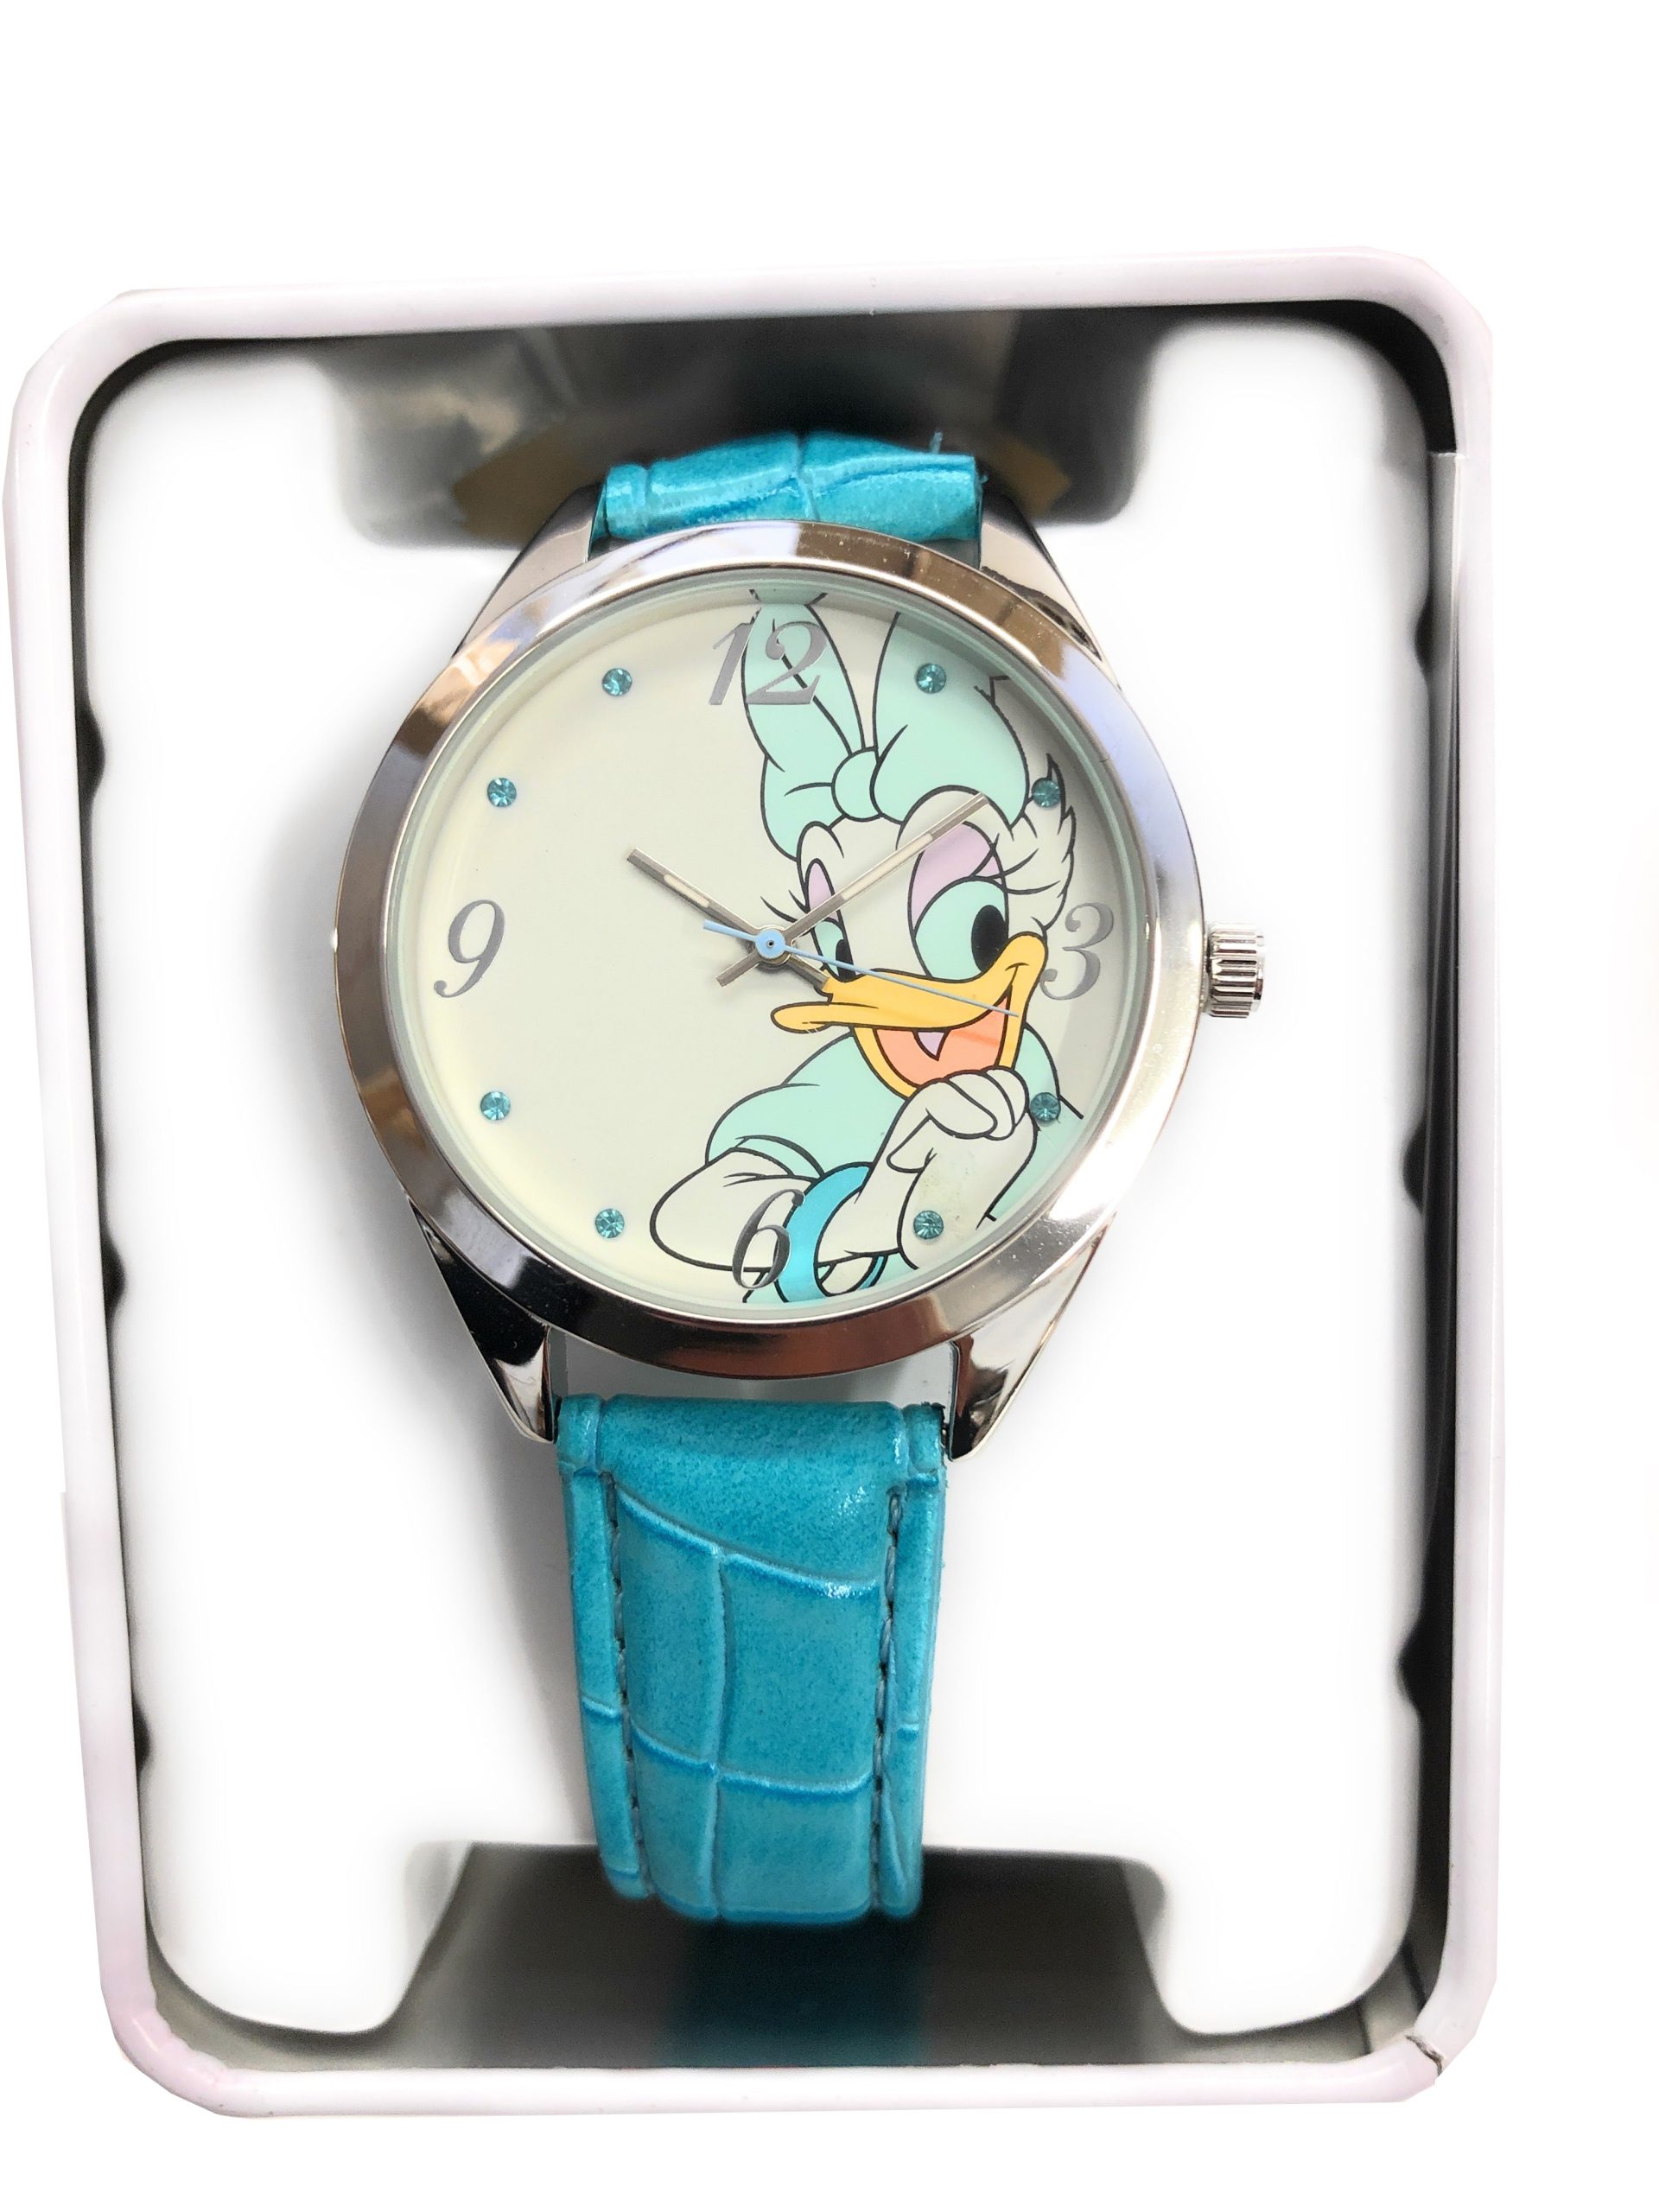 Model: Disney Daisy Duck Watch with Genuine Leather Light Green Strap